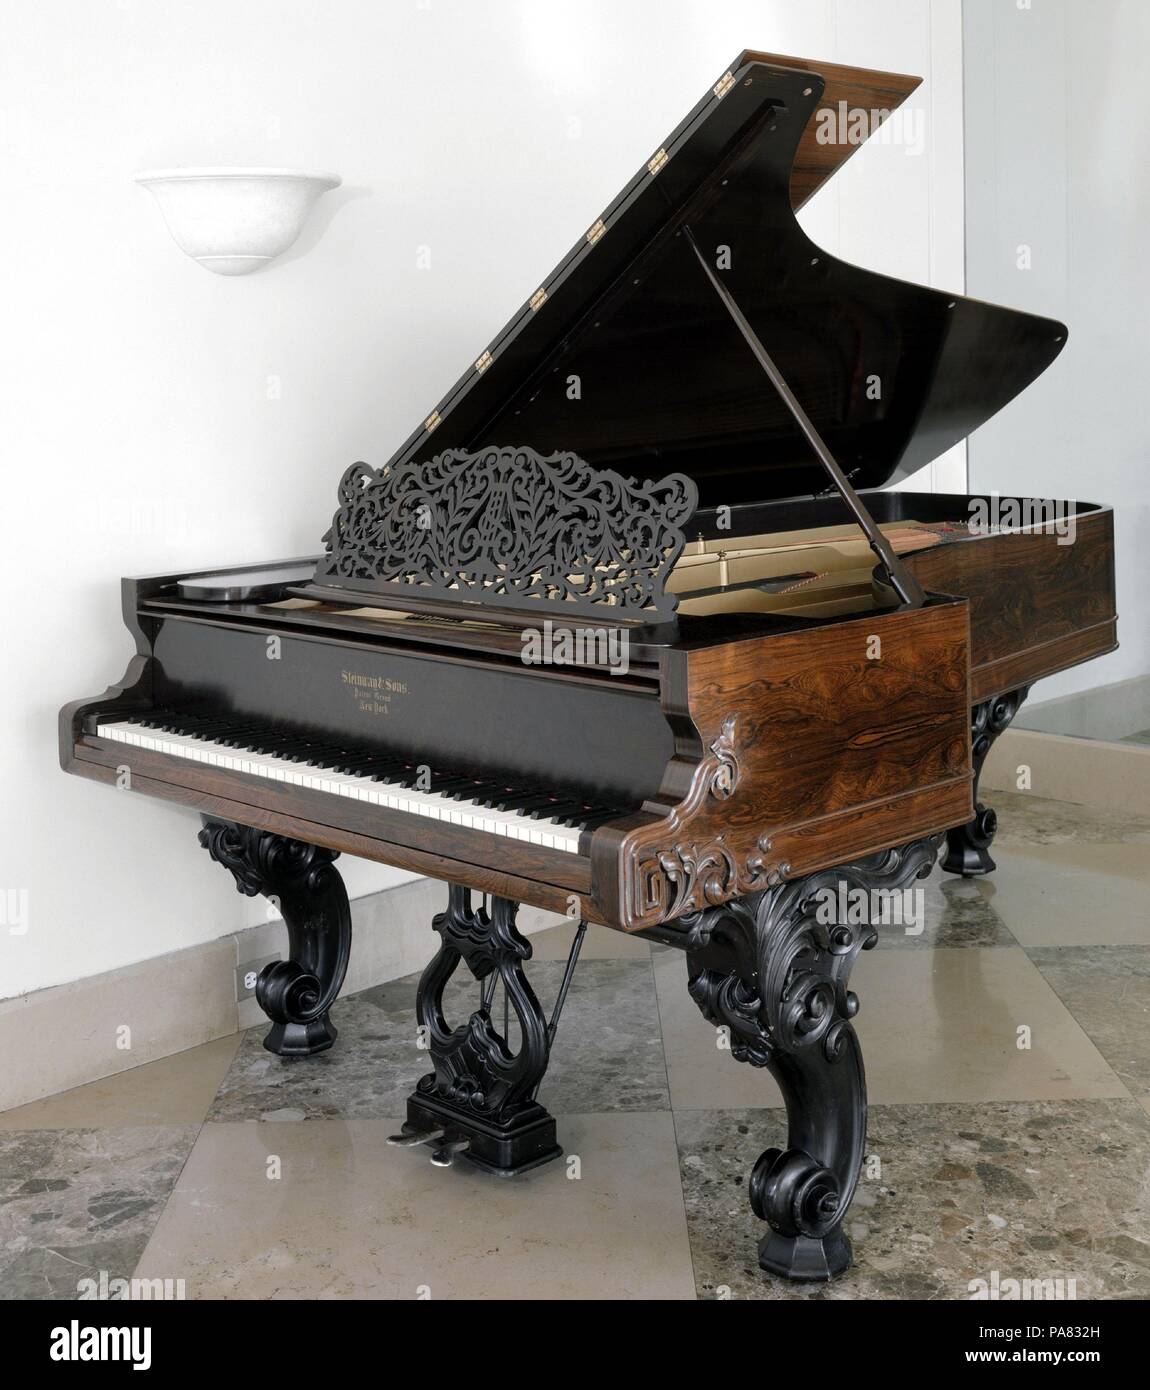 Grand Piano. Culture: American. Dimensions: Depth: 61 5/8 in. (156.5 cm).  Maker: Steinway & Sons. Date: 1868. This grand piano was known as a "Plain  Grand Style 2" piano. The 8 foot